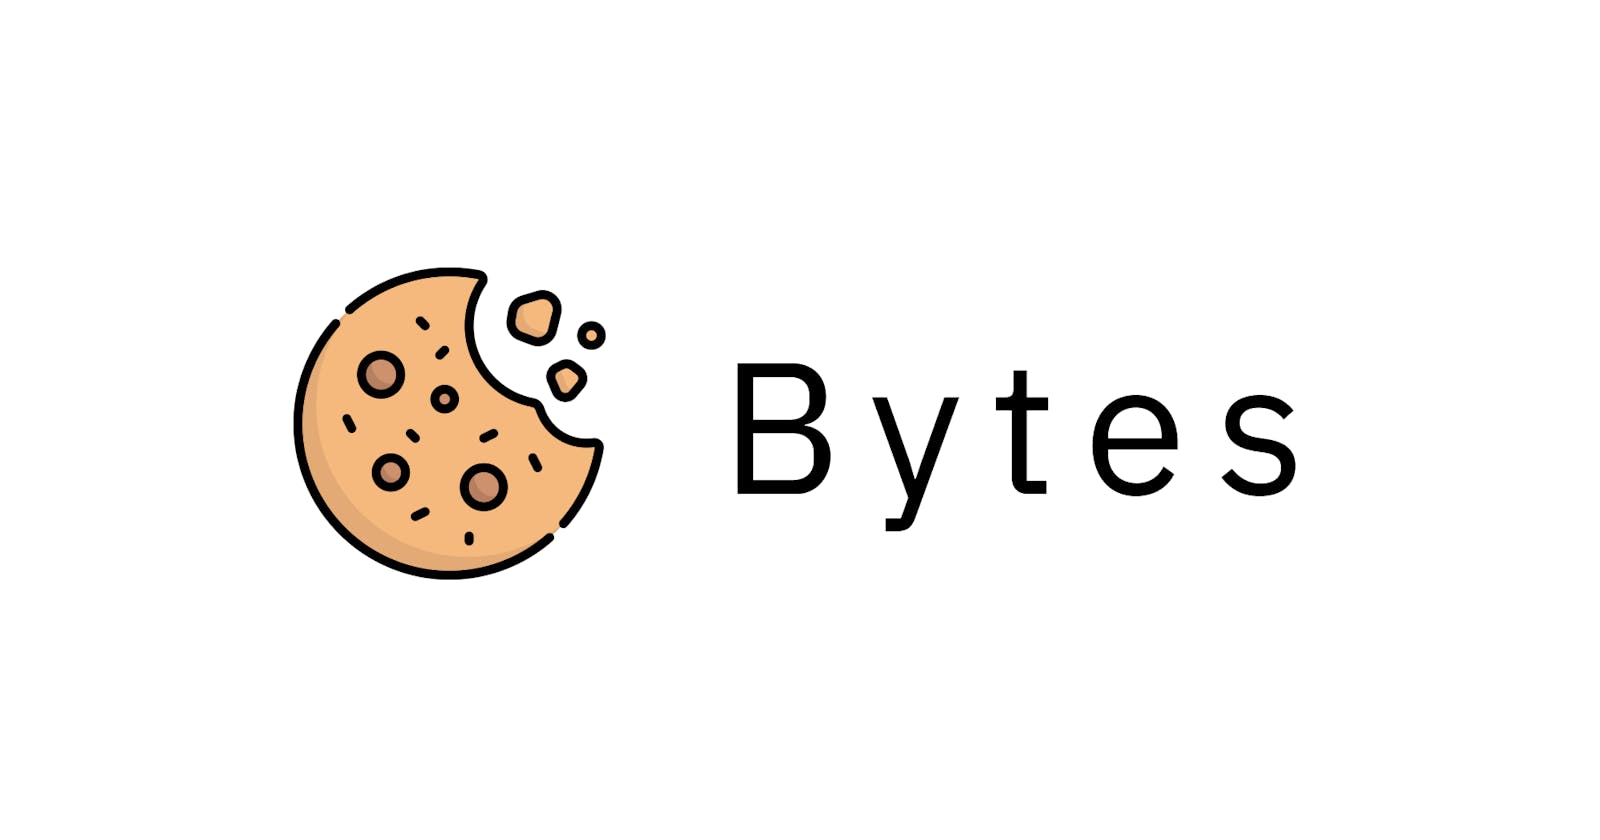 Introducing Bytes - An AI-powered progressive web app (PWA) that delivers news to users in an innovative and user-friendly way.